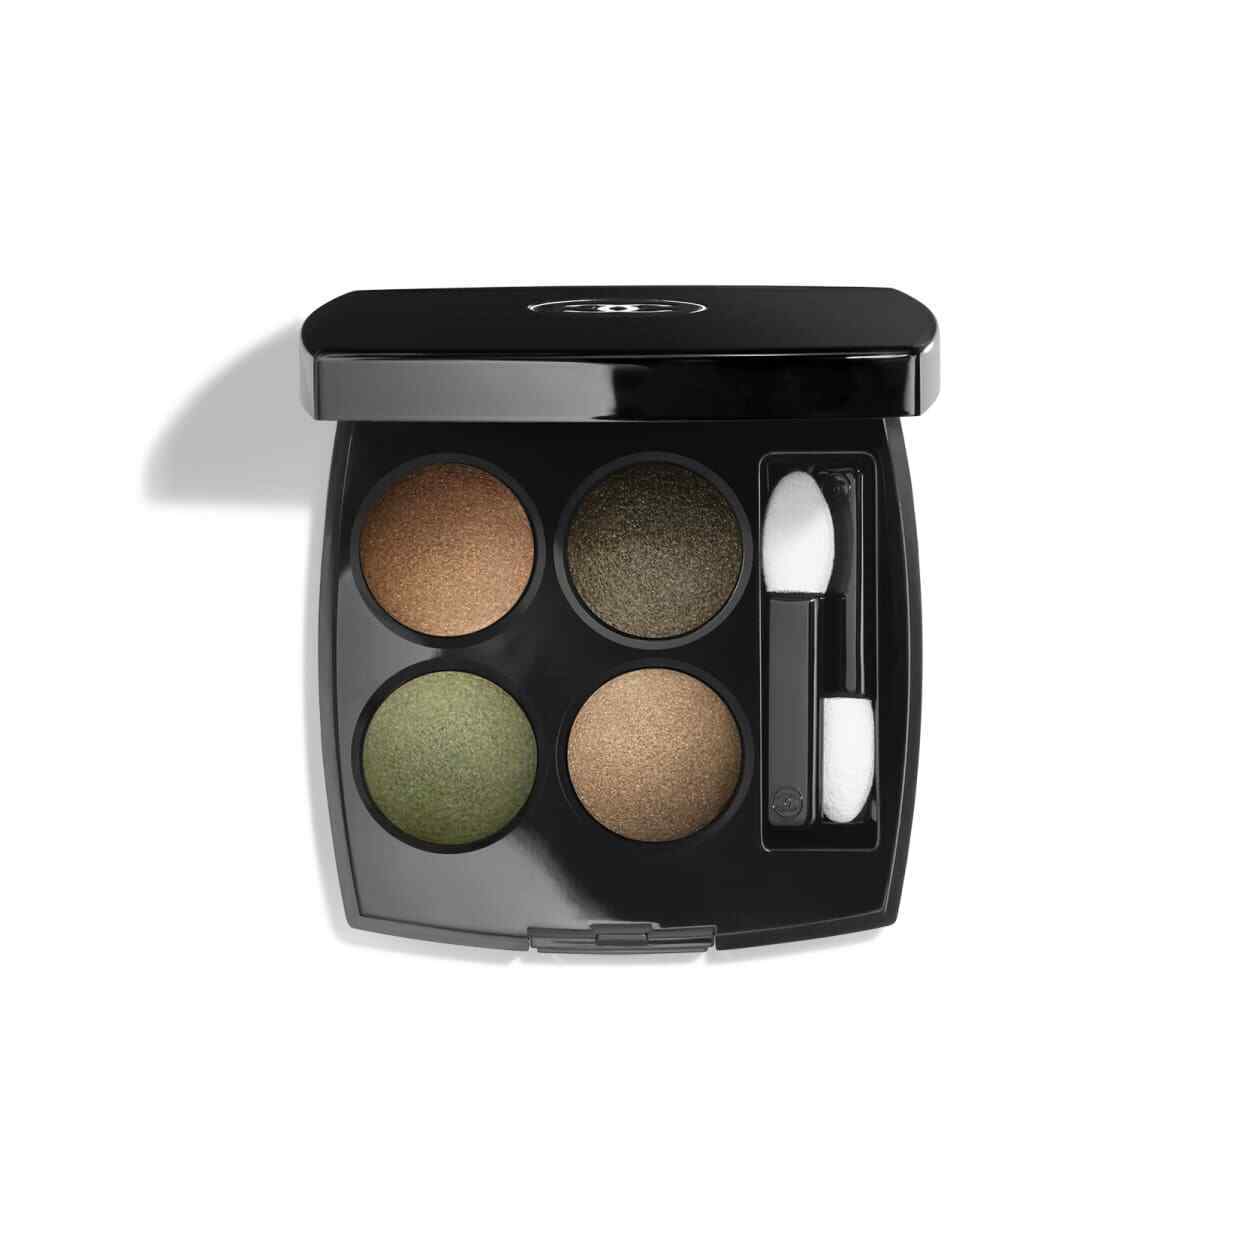 CHANEL LES 4 OMBRES 318 BLURRY GREEN MULTI-EFFECT QUADRA EYESHADOW NEW  LIMITED